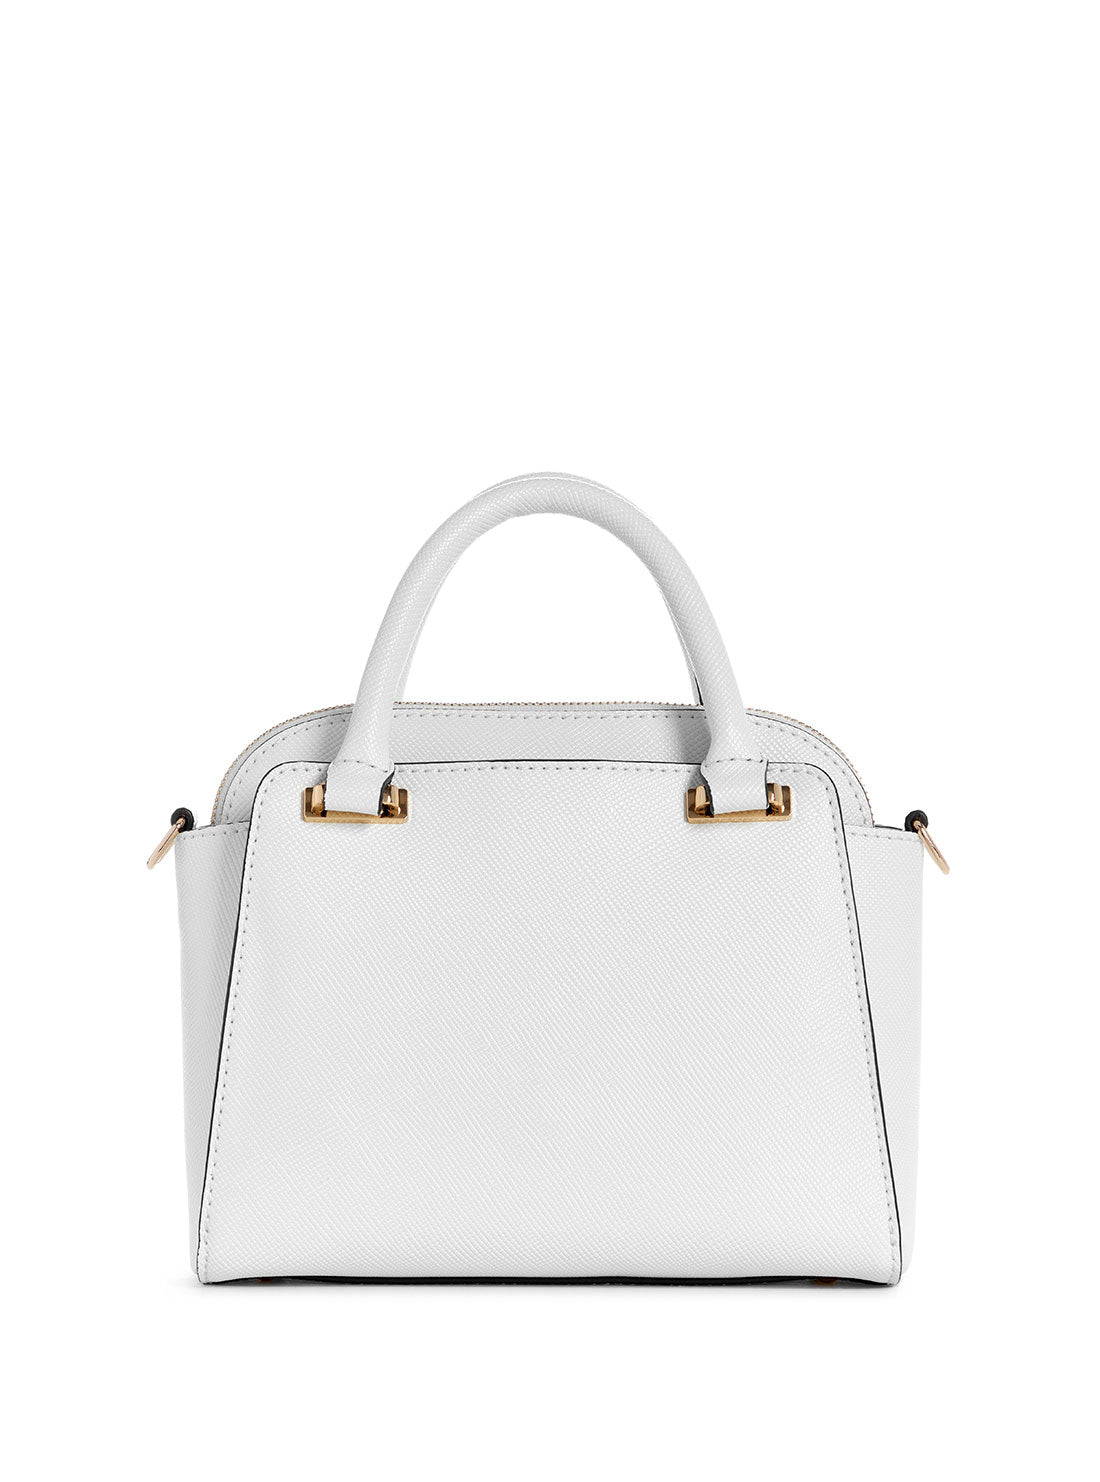 GUESS White Avis Small Satchel Bag back view